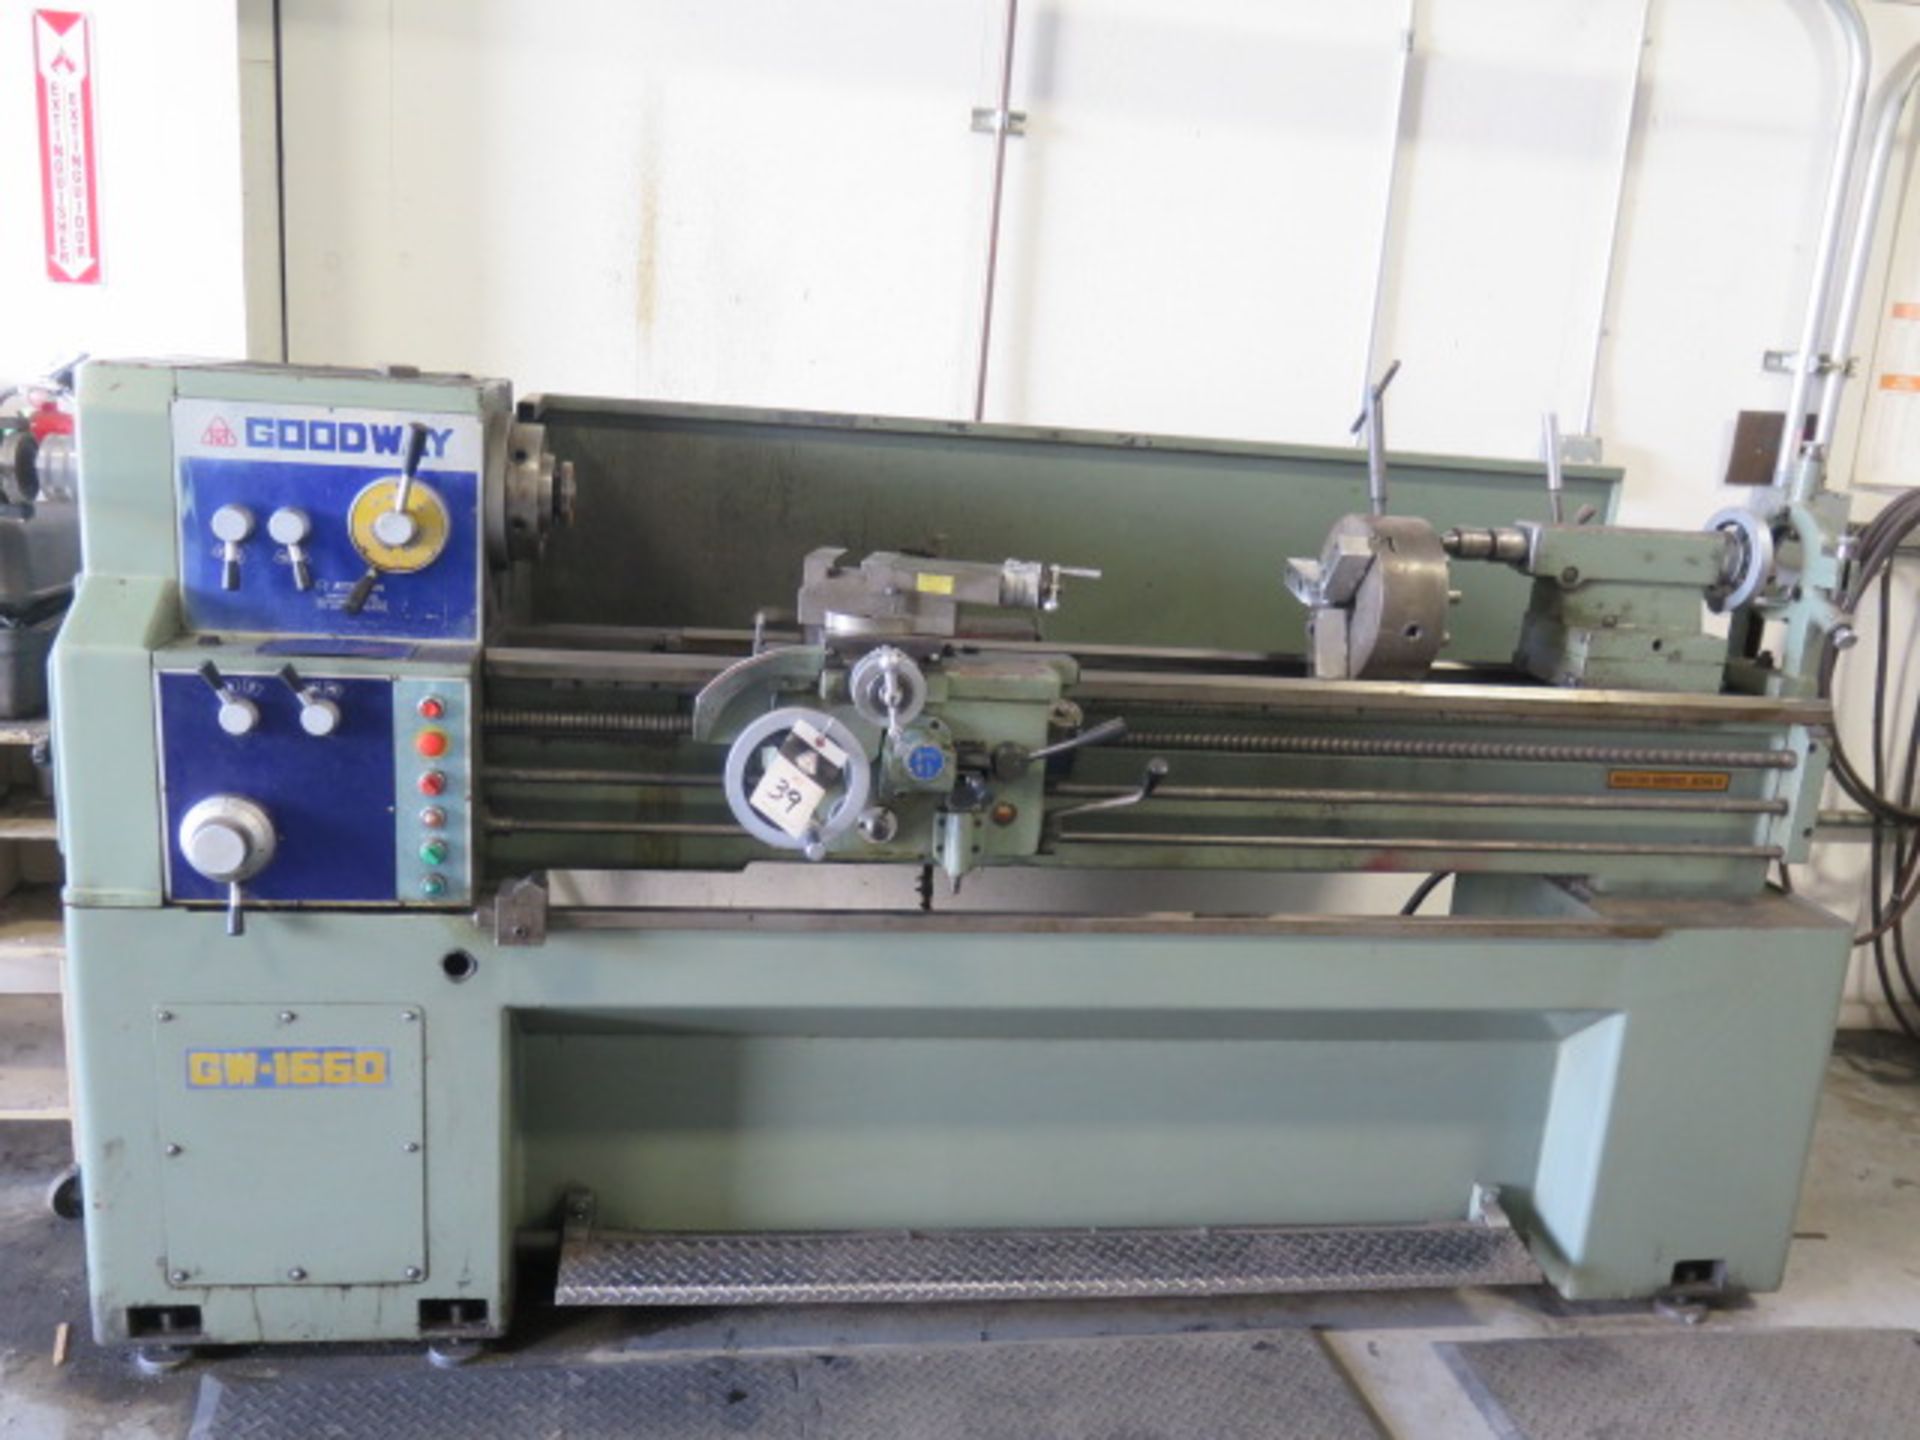 Goodway GW-1660 16" x 60" Geared Head Gap Bed Lathe w/ 33-2000 RPM, Inch/mm Threading, SOLD AS IS